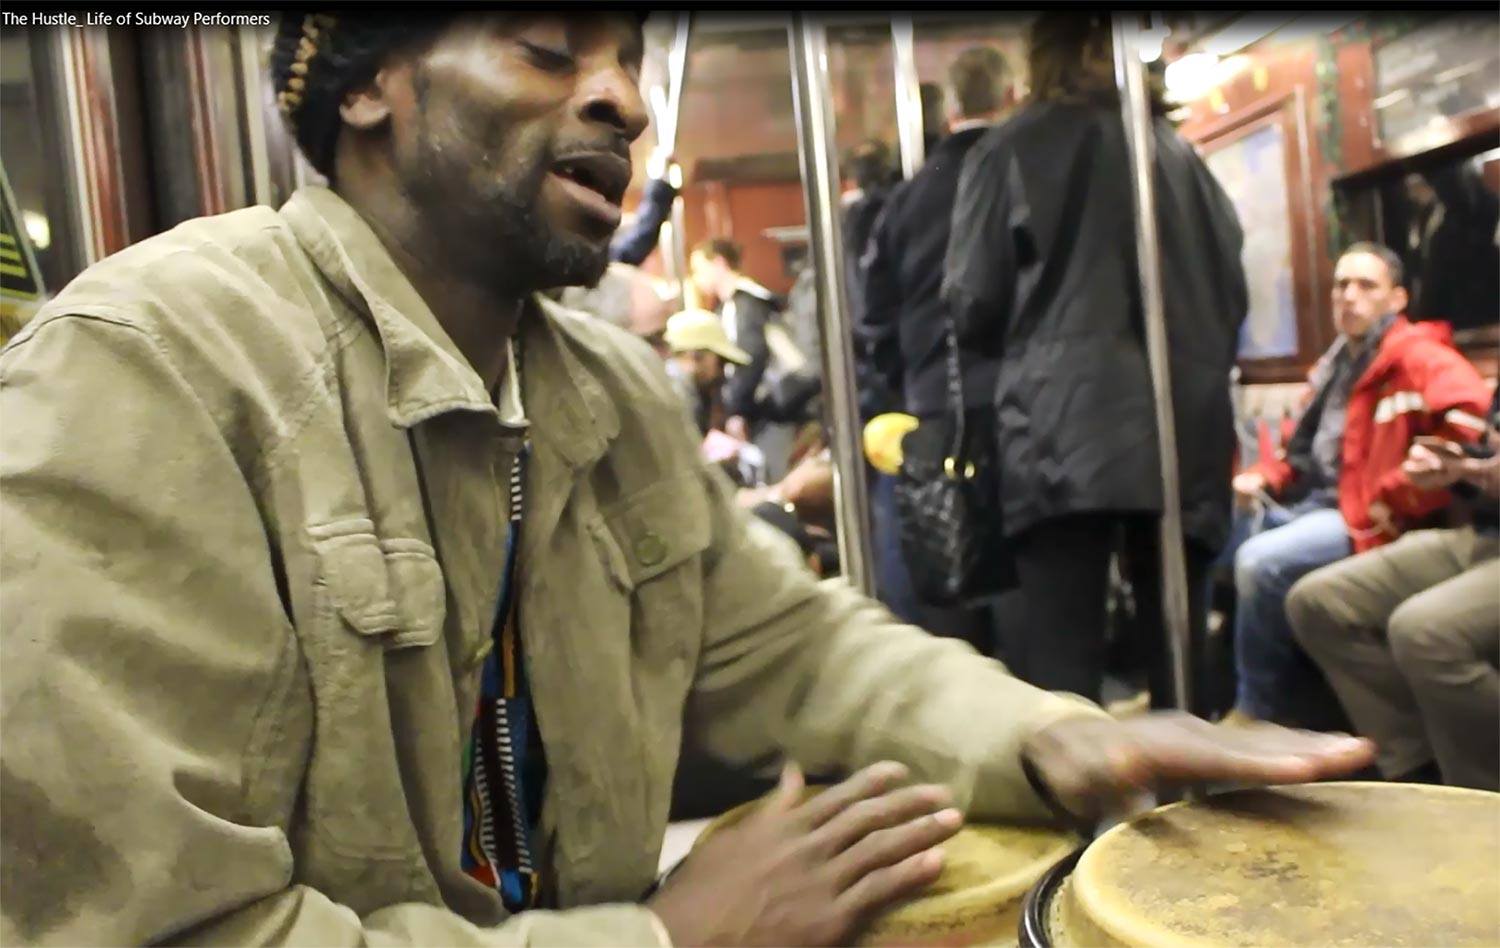 A person singing and playing the drums on the subway